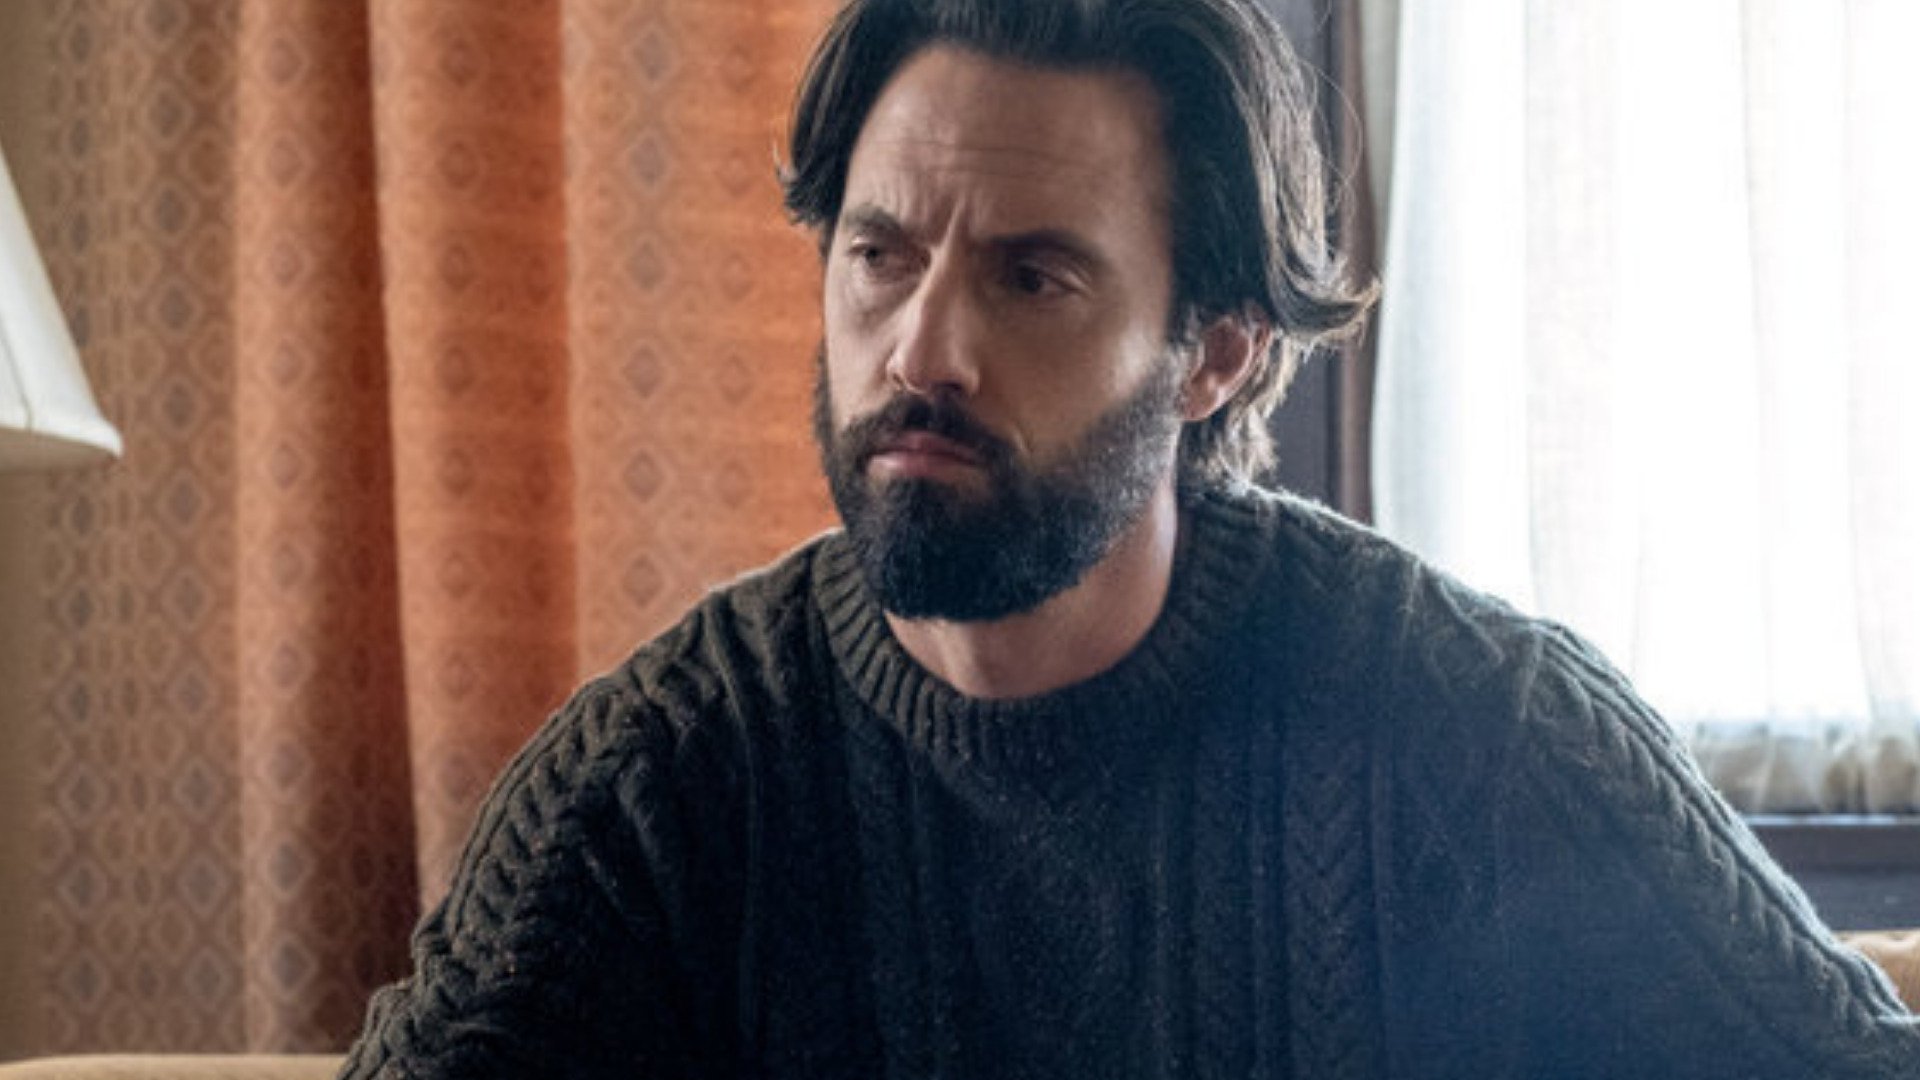 Milo Ventimiglia as Jack Pearson looking upset in ‘This Is Us’ Season 6 Episode 4, ‘Don’t Let Me Keep You’